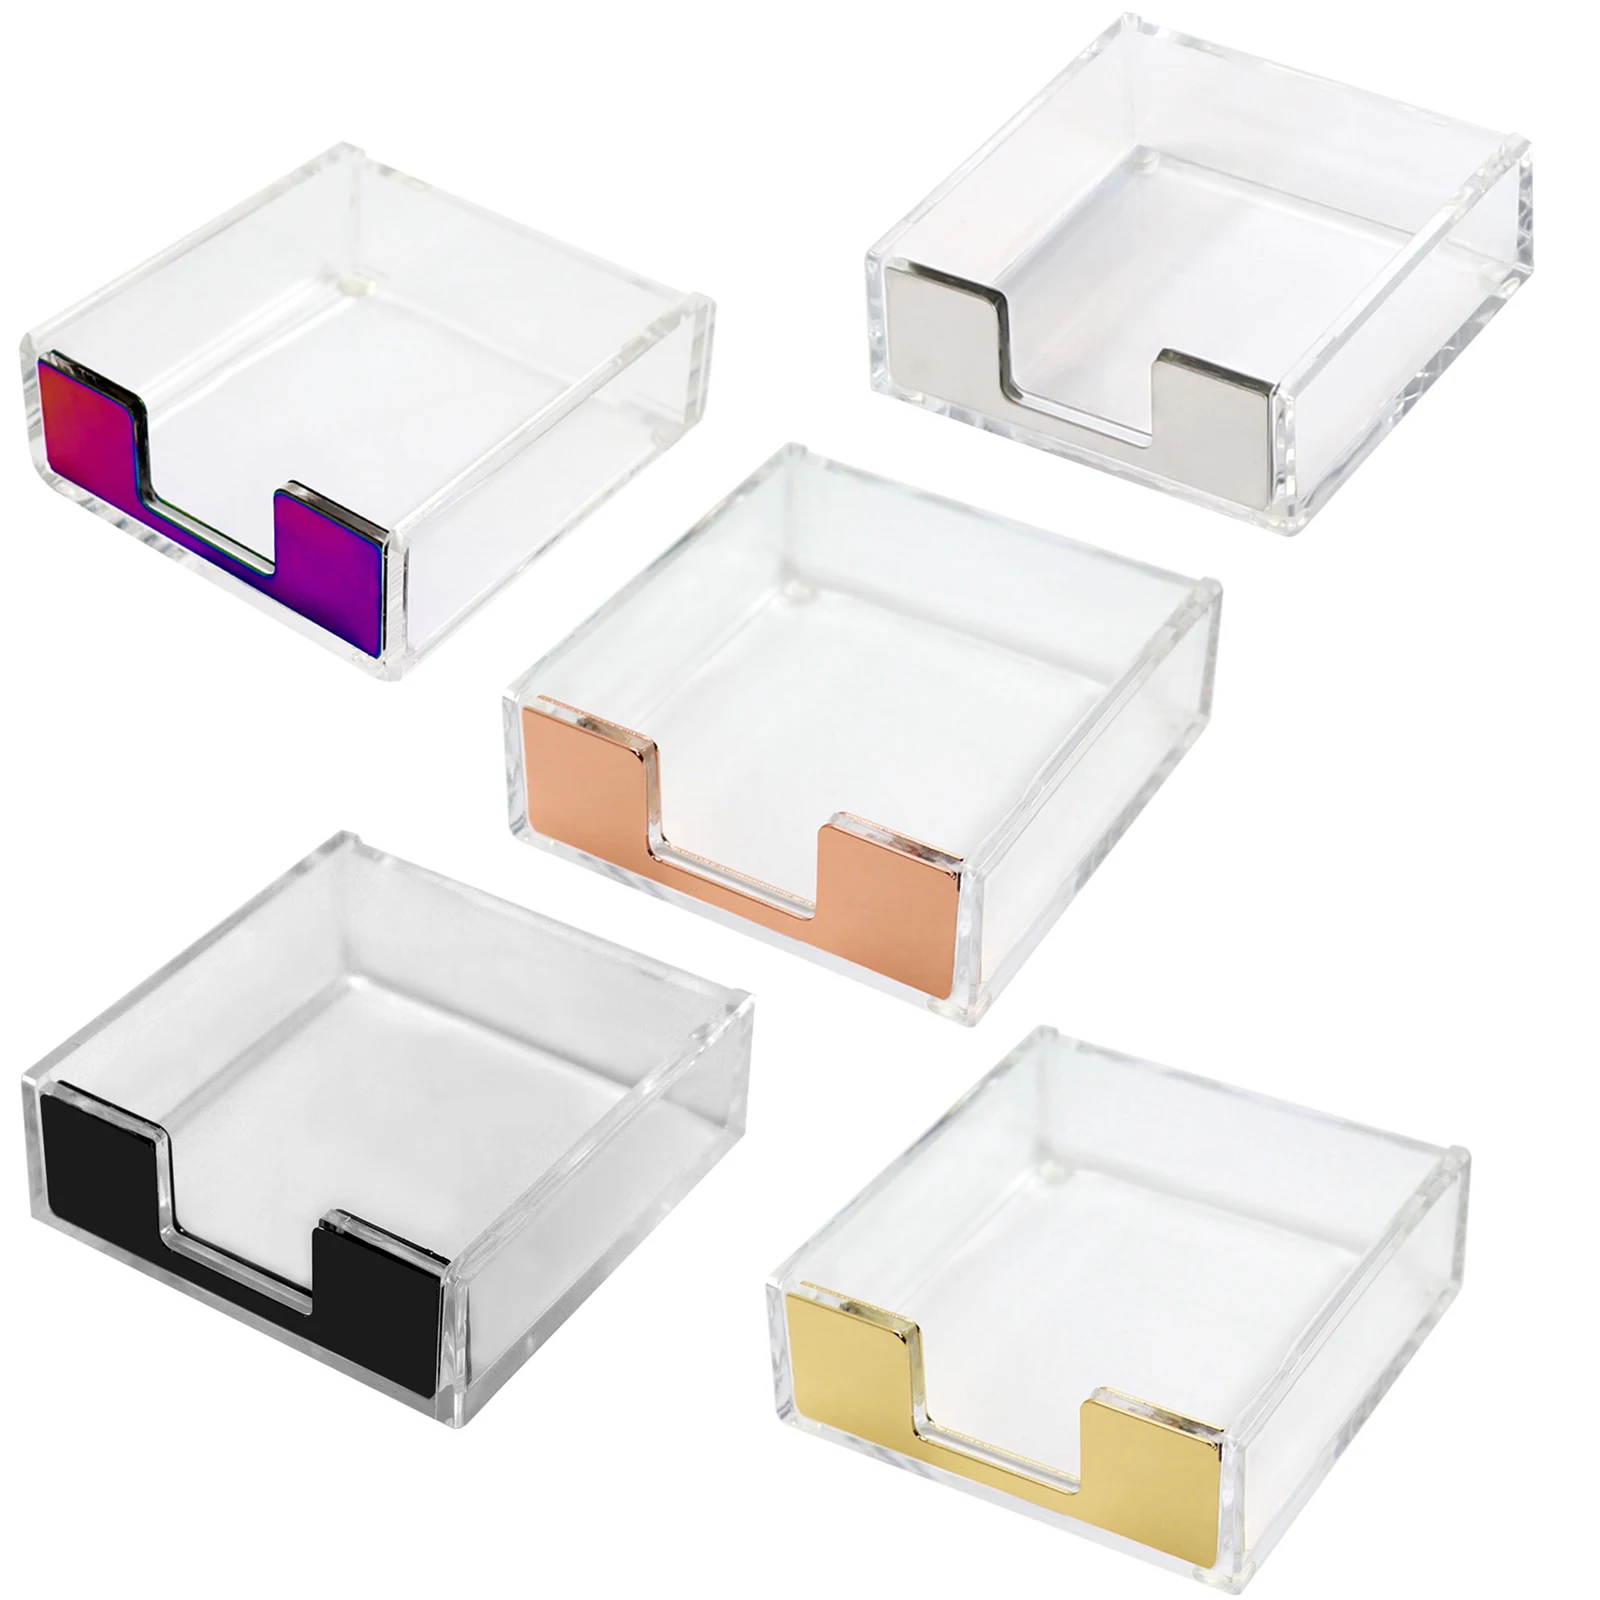 Acrylic Clear Sticky Notes Memo Pad Holder Cards Dispenser Clear Desk Silver Office Supplies Cute Notepad Holder